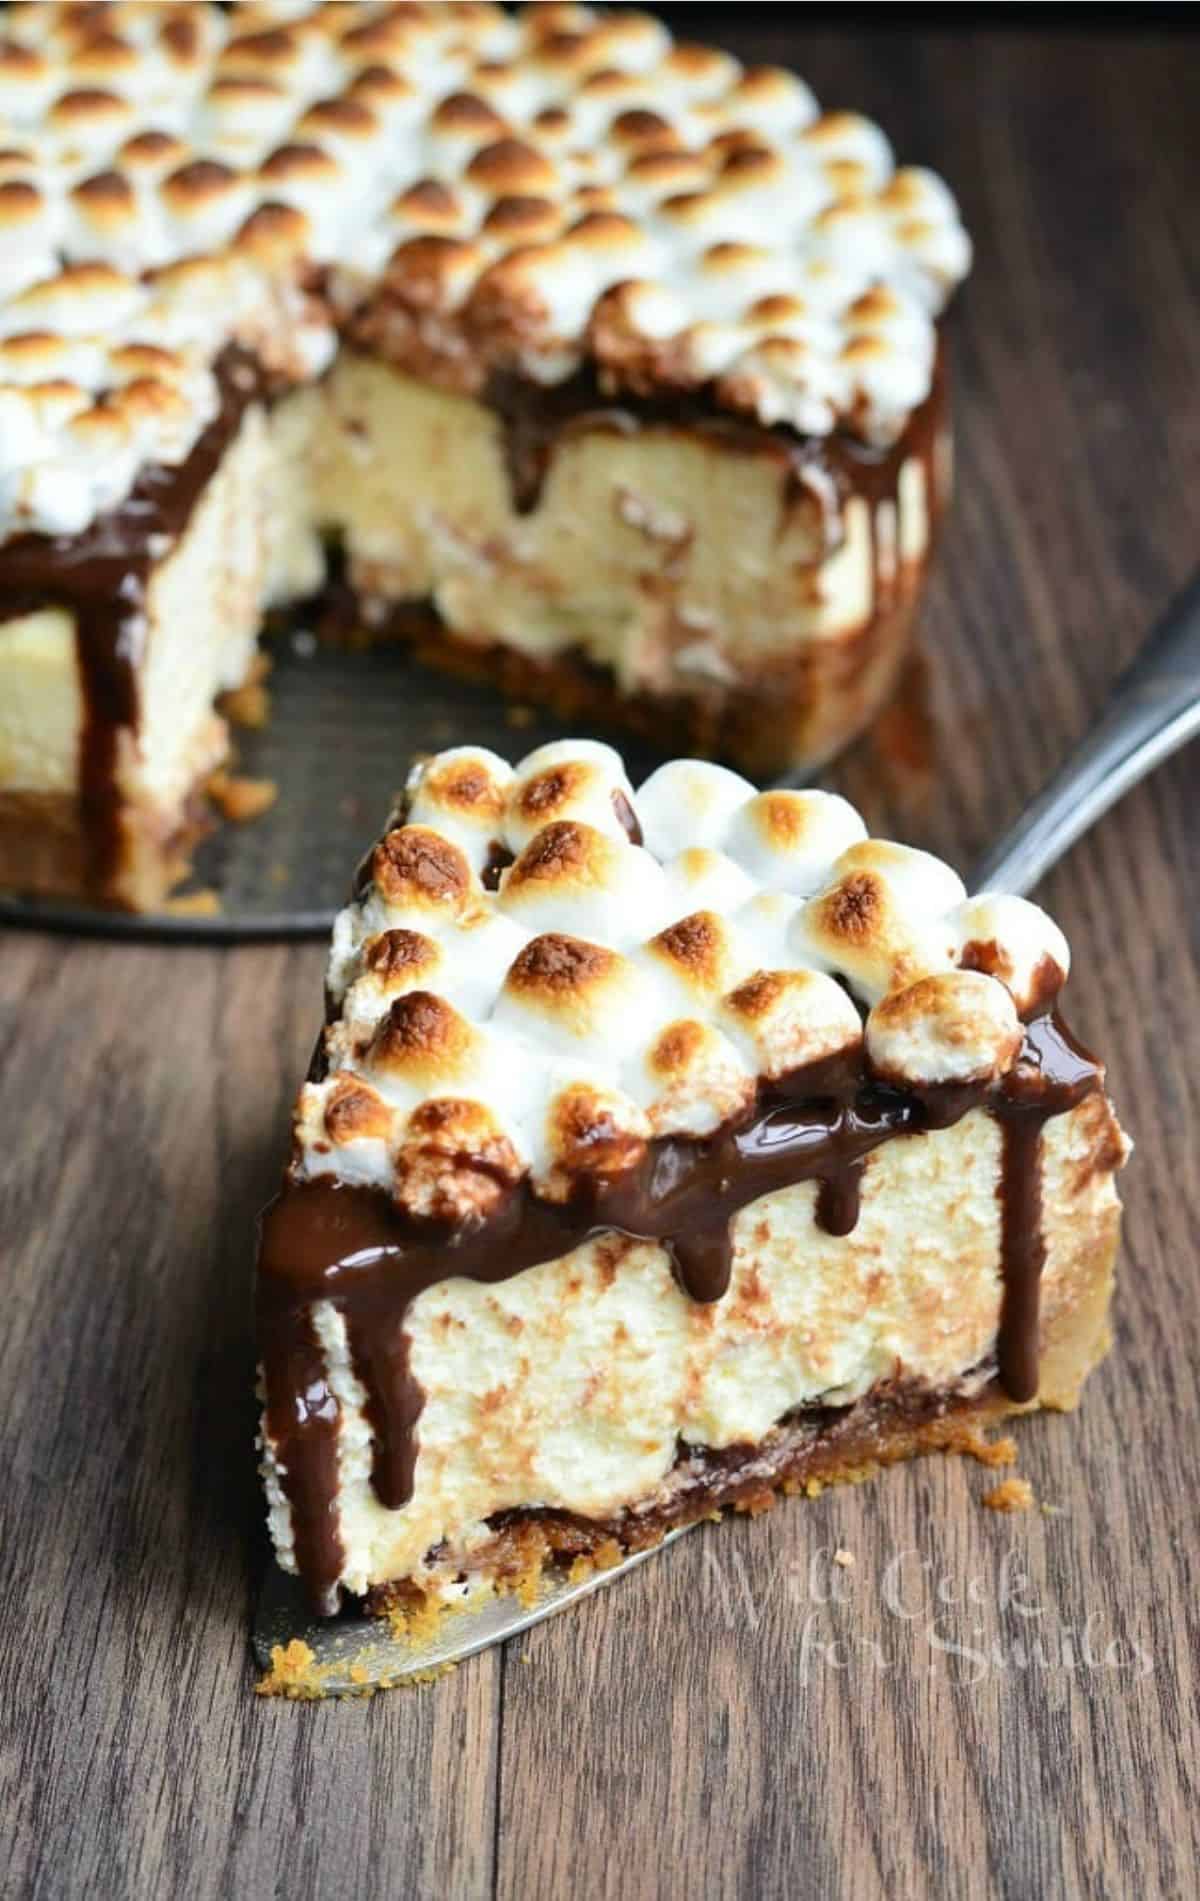 cut out slice of smores cheesecake next to a while cheesecake on wooden board.